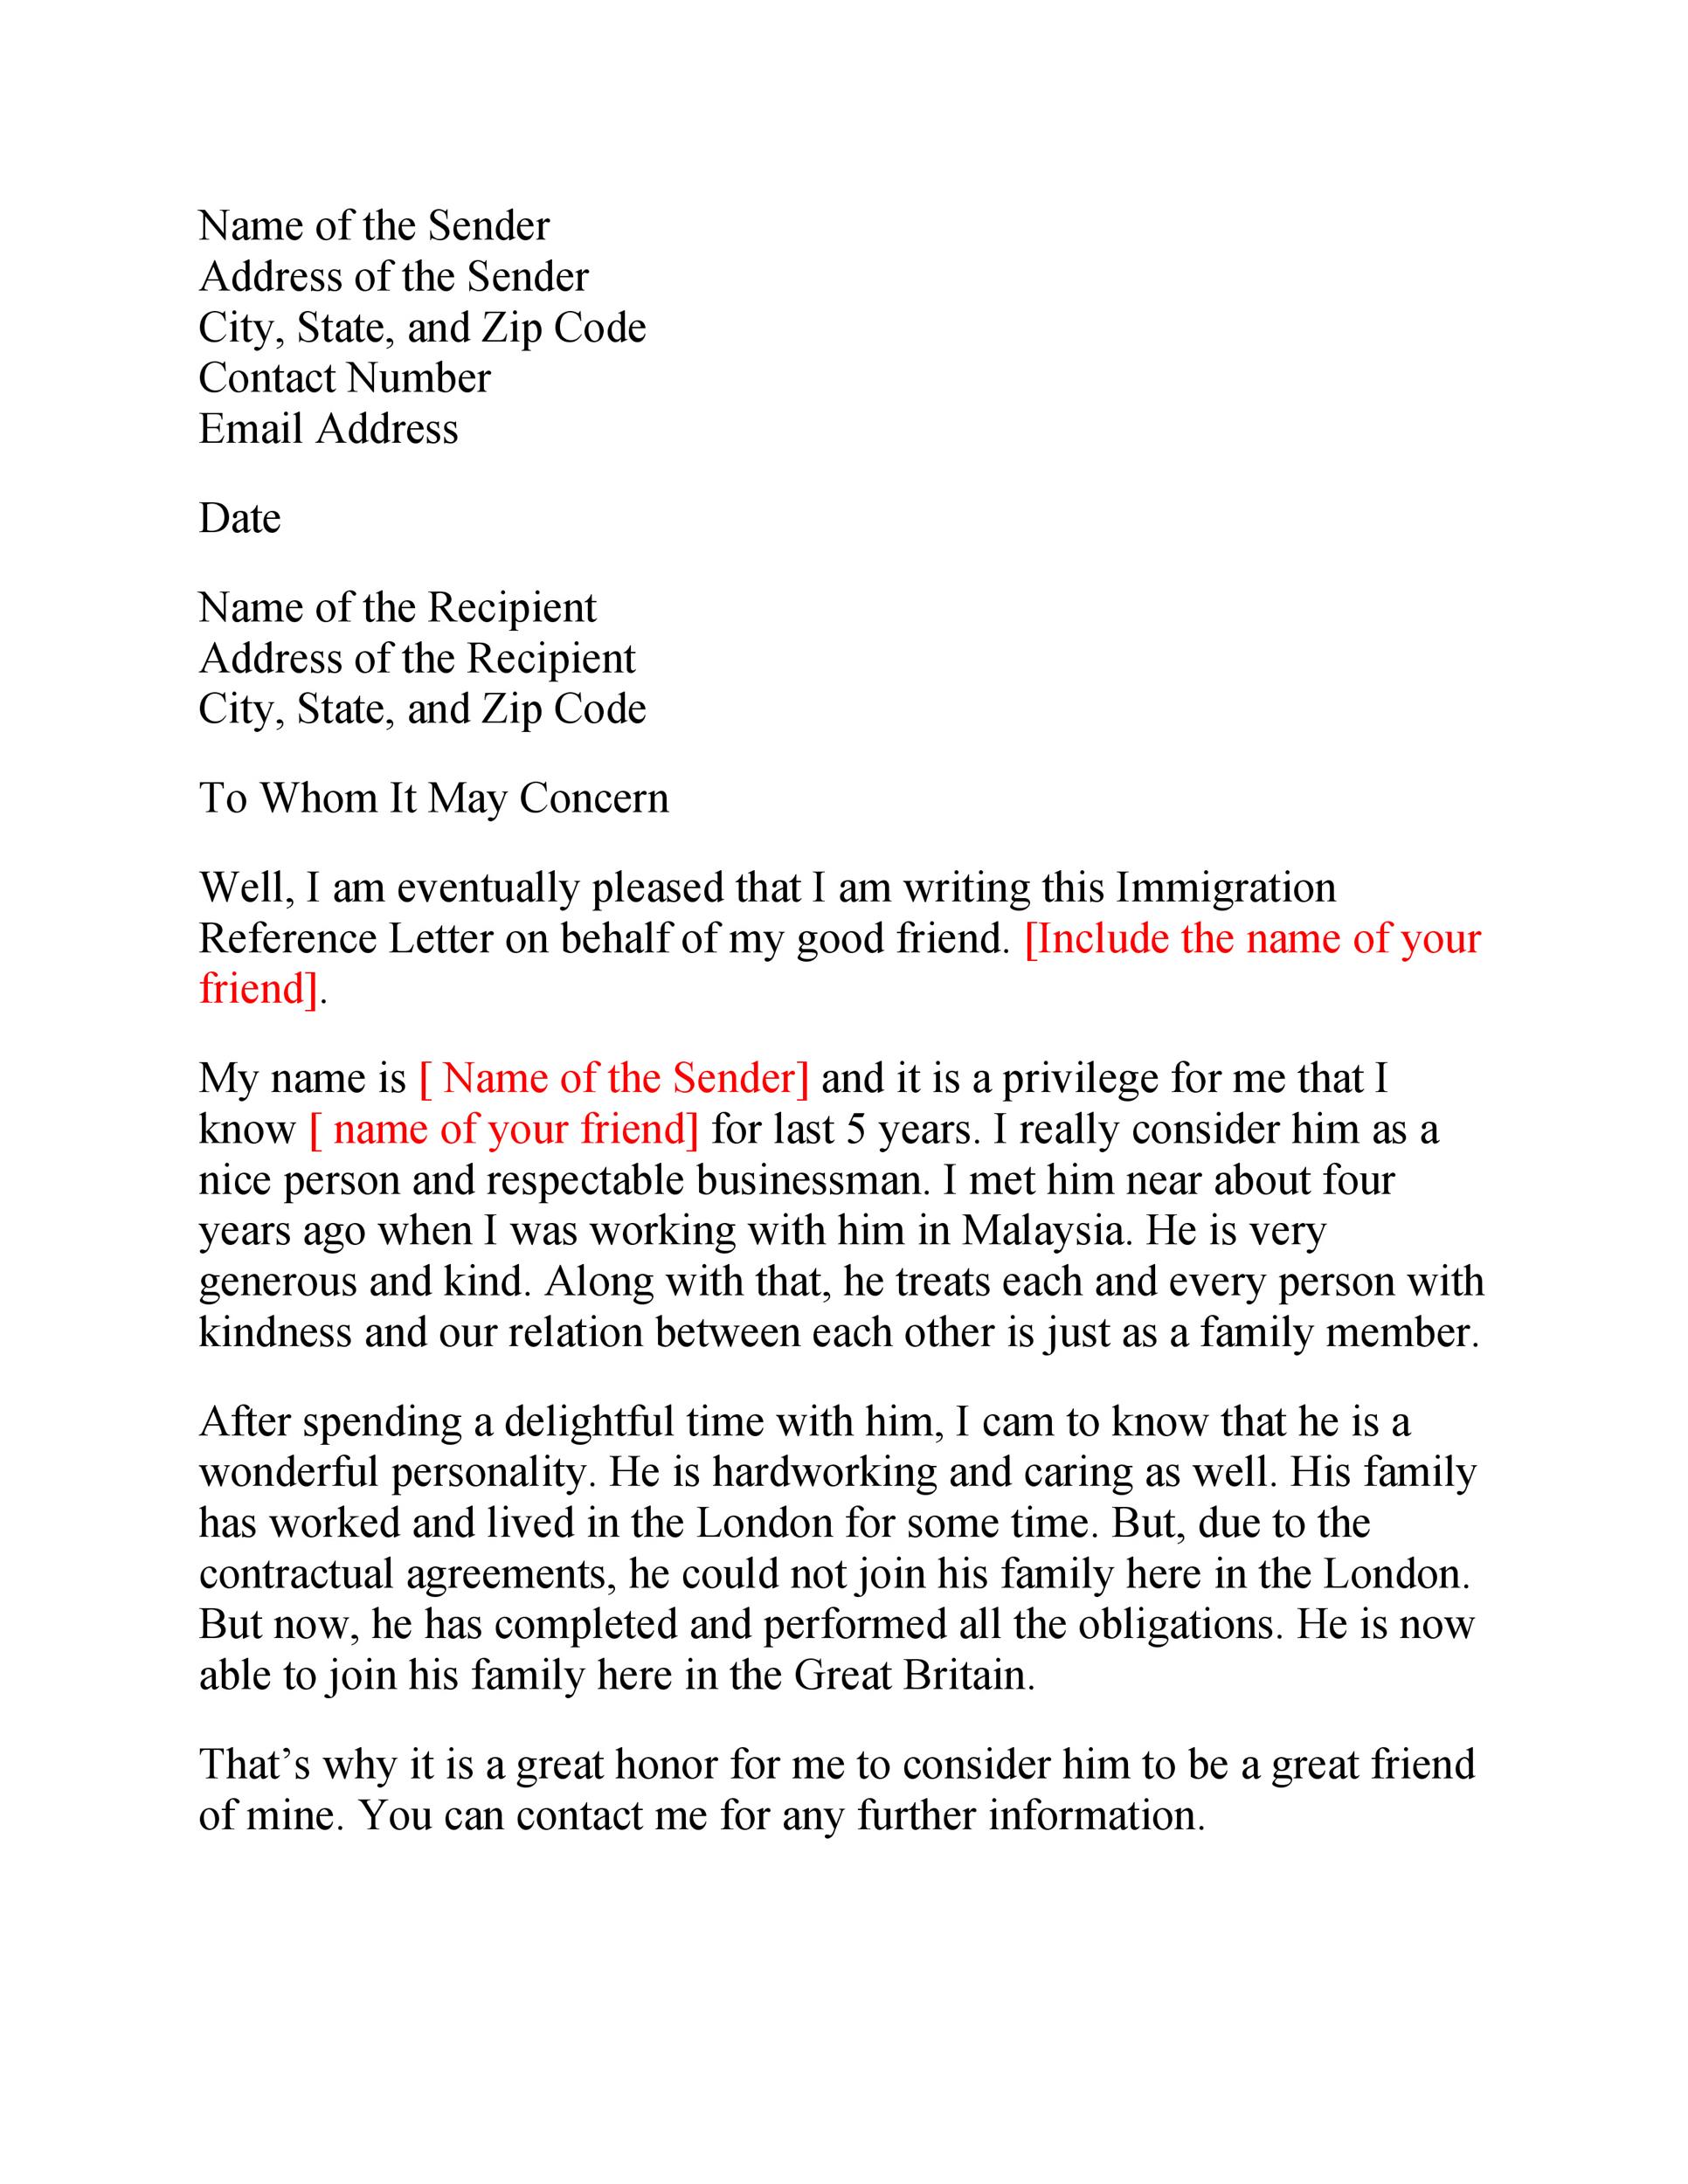 Character Letter Of Recommendation Sample For Immigration